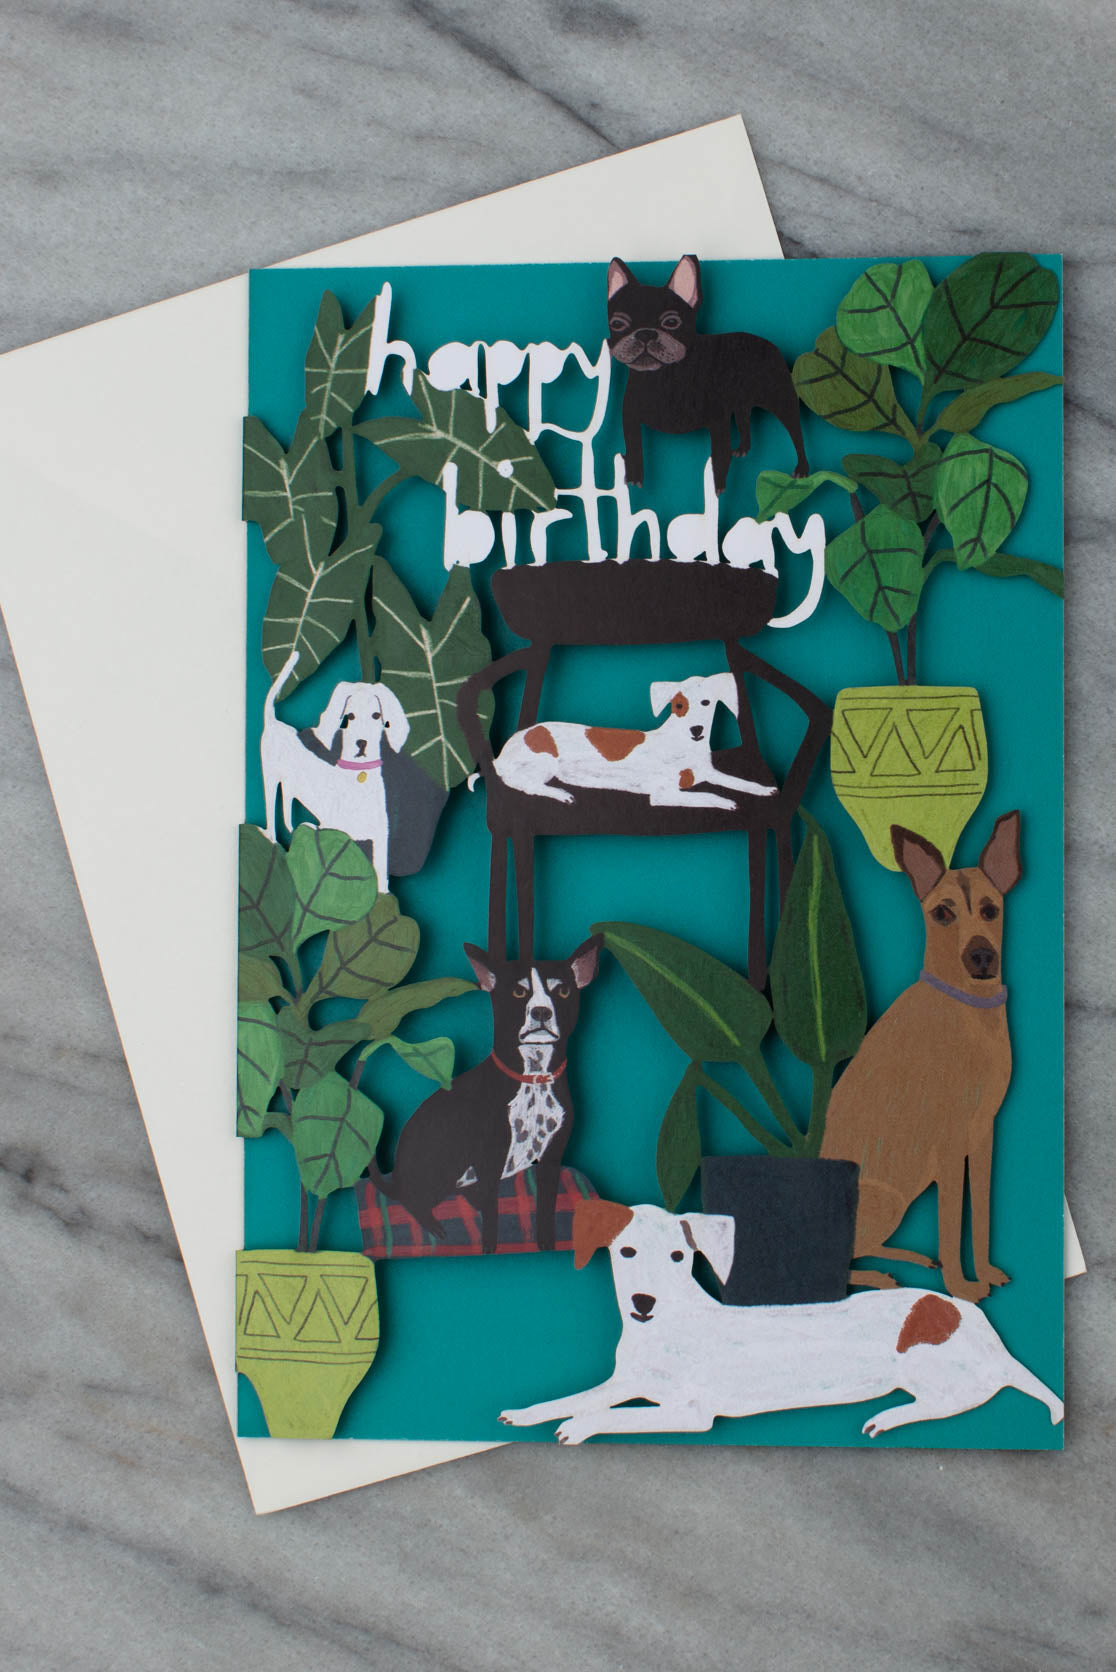 Laser cut happy birthday card with dogs and plants on the front cover